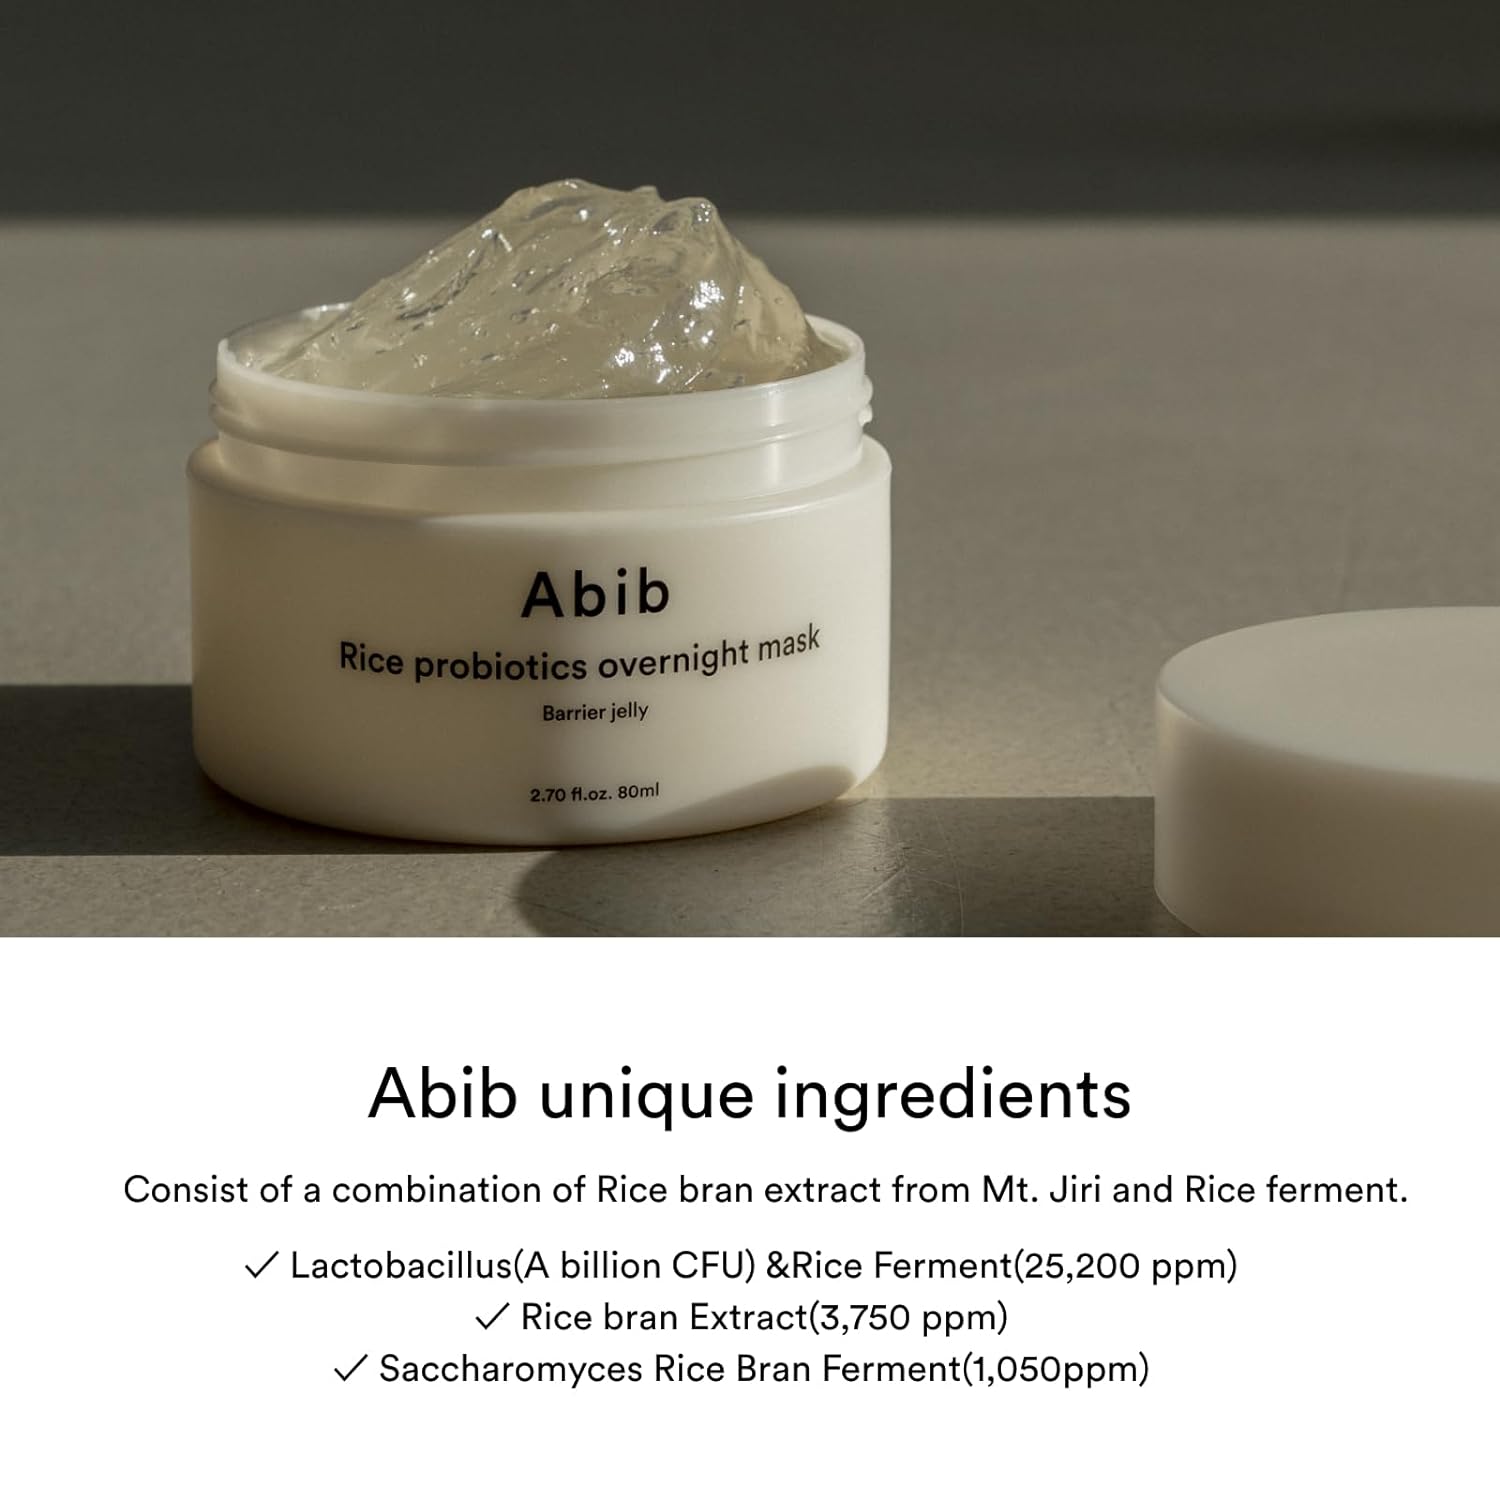 Abib Rice Probiotics Overnight Mask Barrier Jelly 2.71 fl oz I Intensive Hydrating Nourishing for Skin Barrier, Bouncy Skin Texture, Less Stress : Beauty & Personal Care